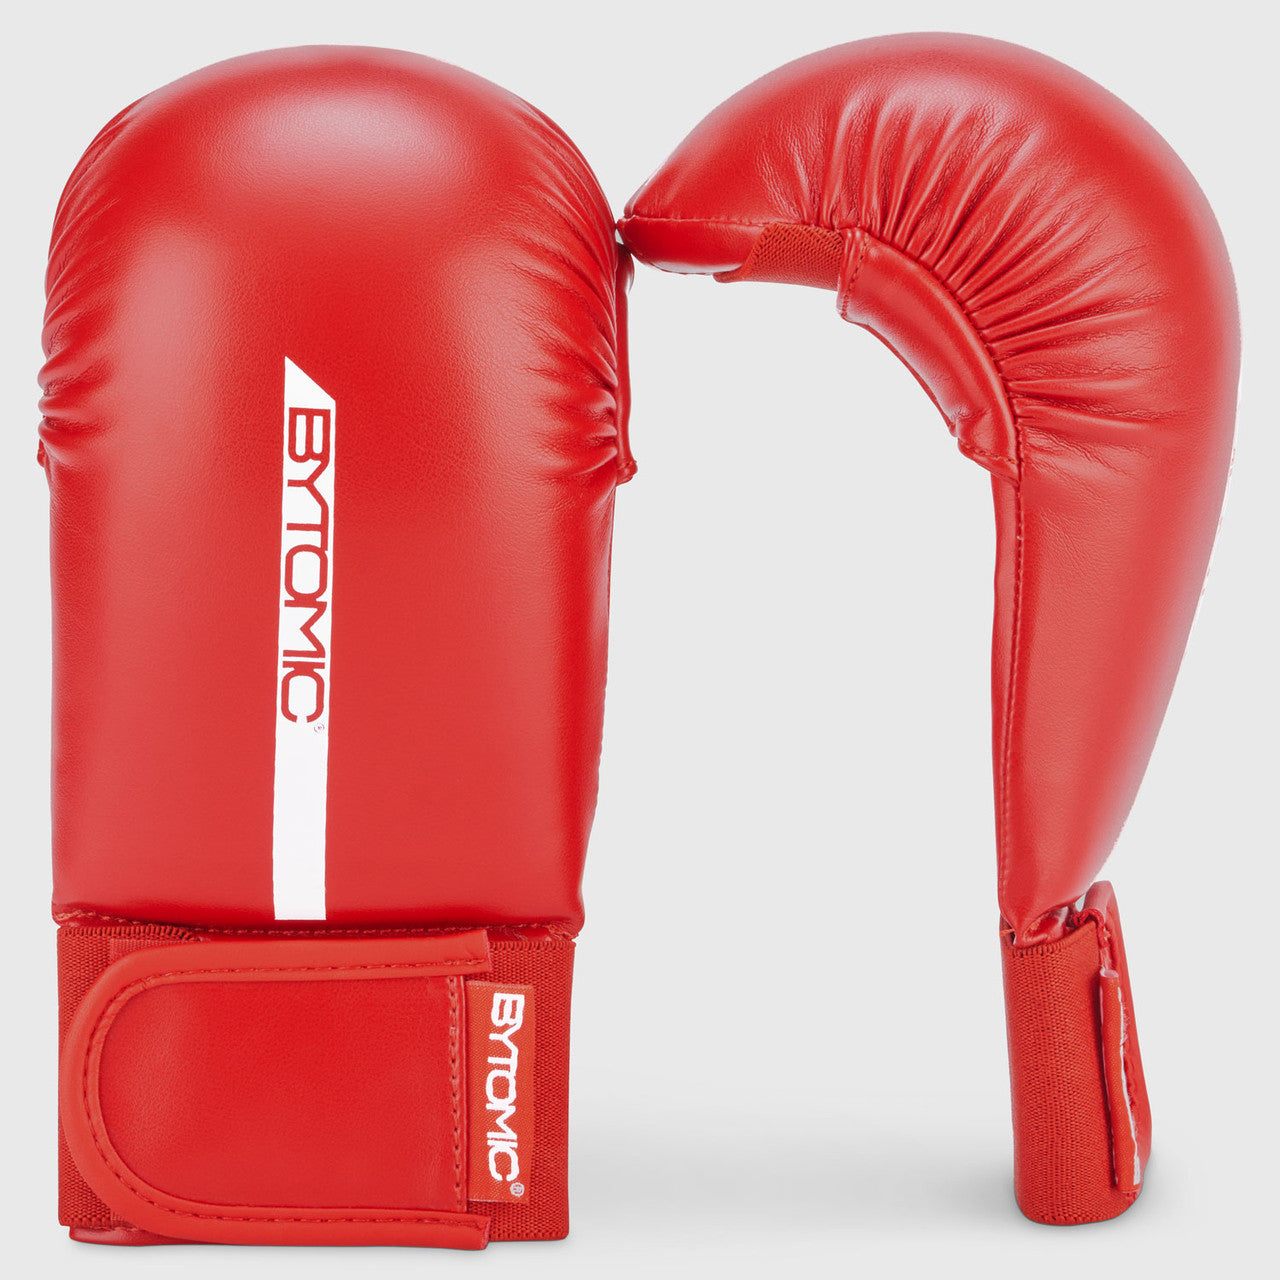 Bytomic Red Label Karate Mitt without Thumb Bytomic